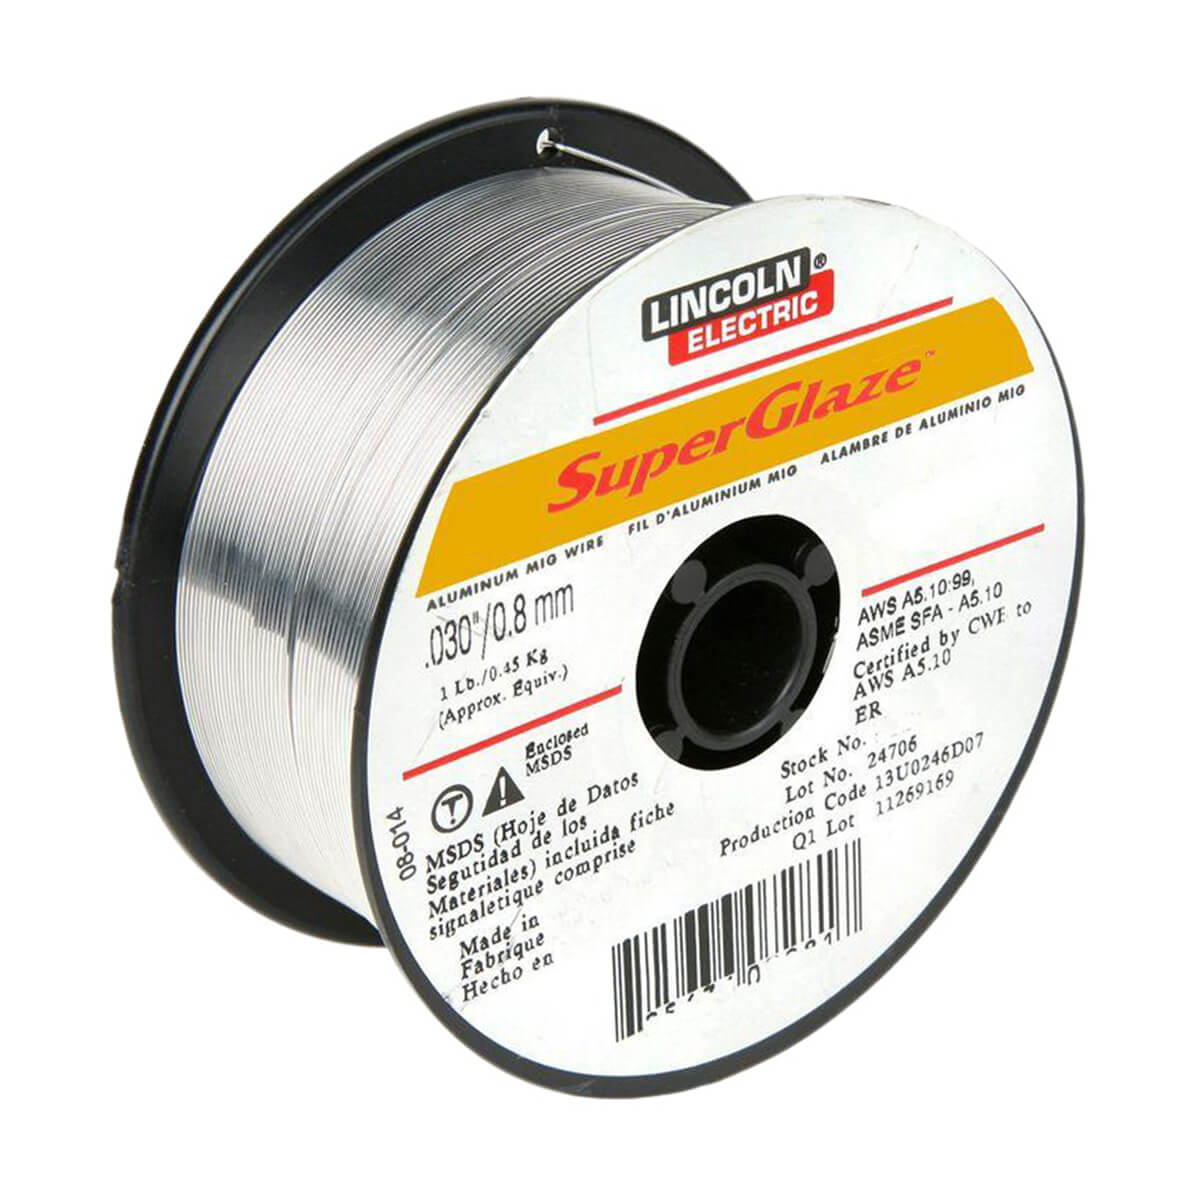 LINCOLN ELECTRIC KH513 Aluminum Welding Wire 4043 - 1 lb Spool